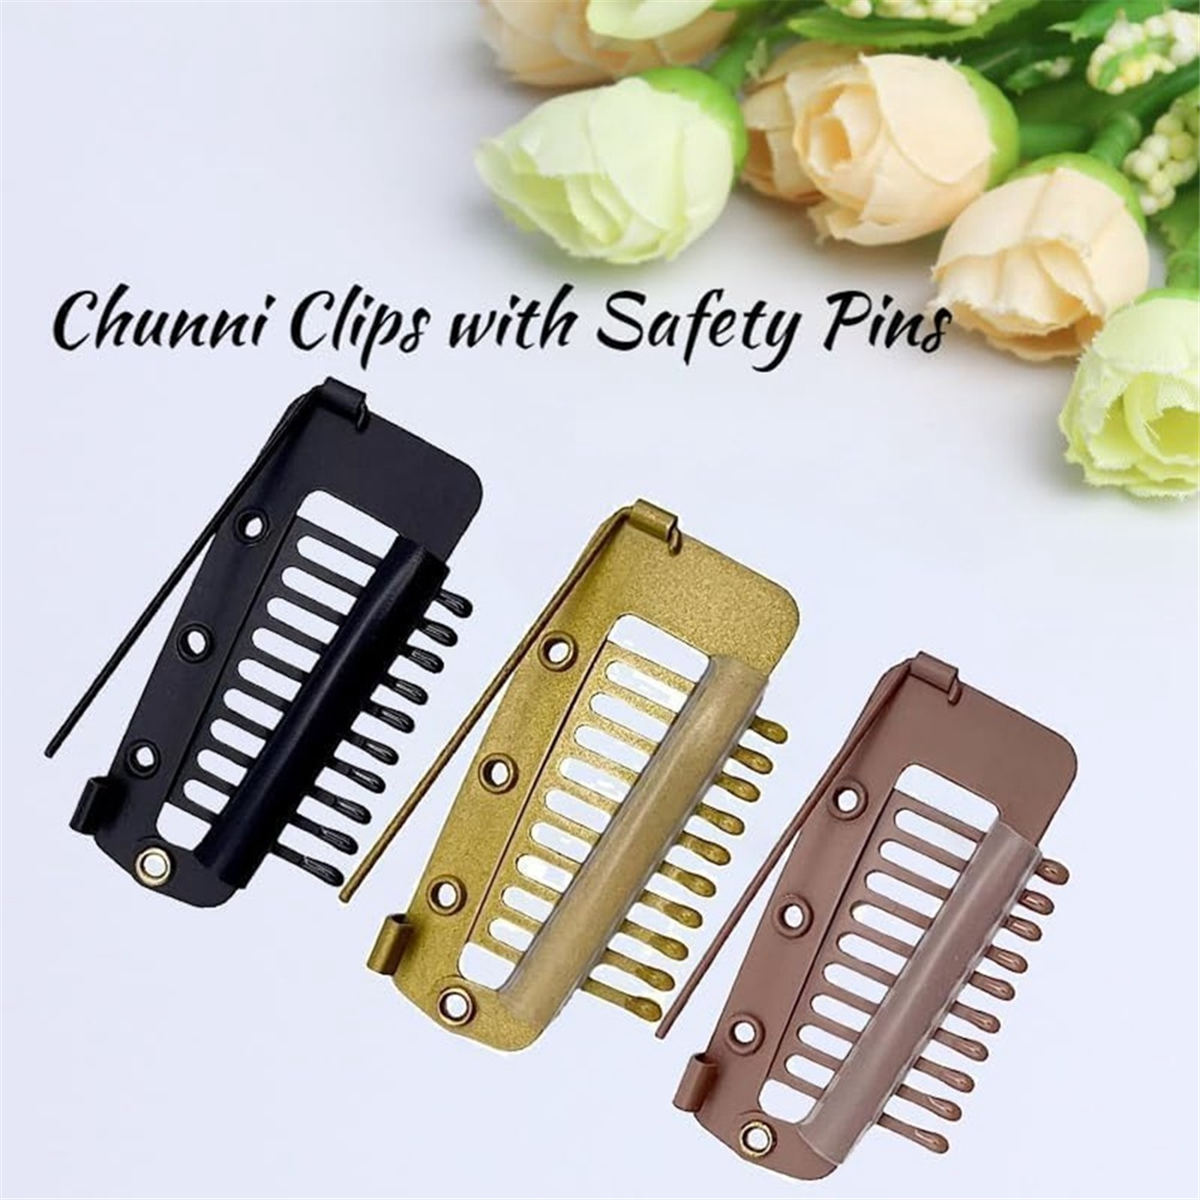 Pack of 10 Strong Chunni Clips with Safety Pin, Easy to Use with Dupatta,  Hijab & Tikka Setting Gold 